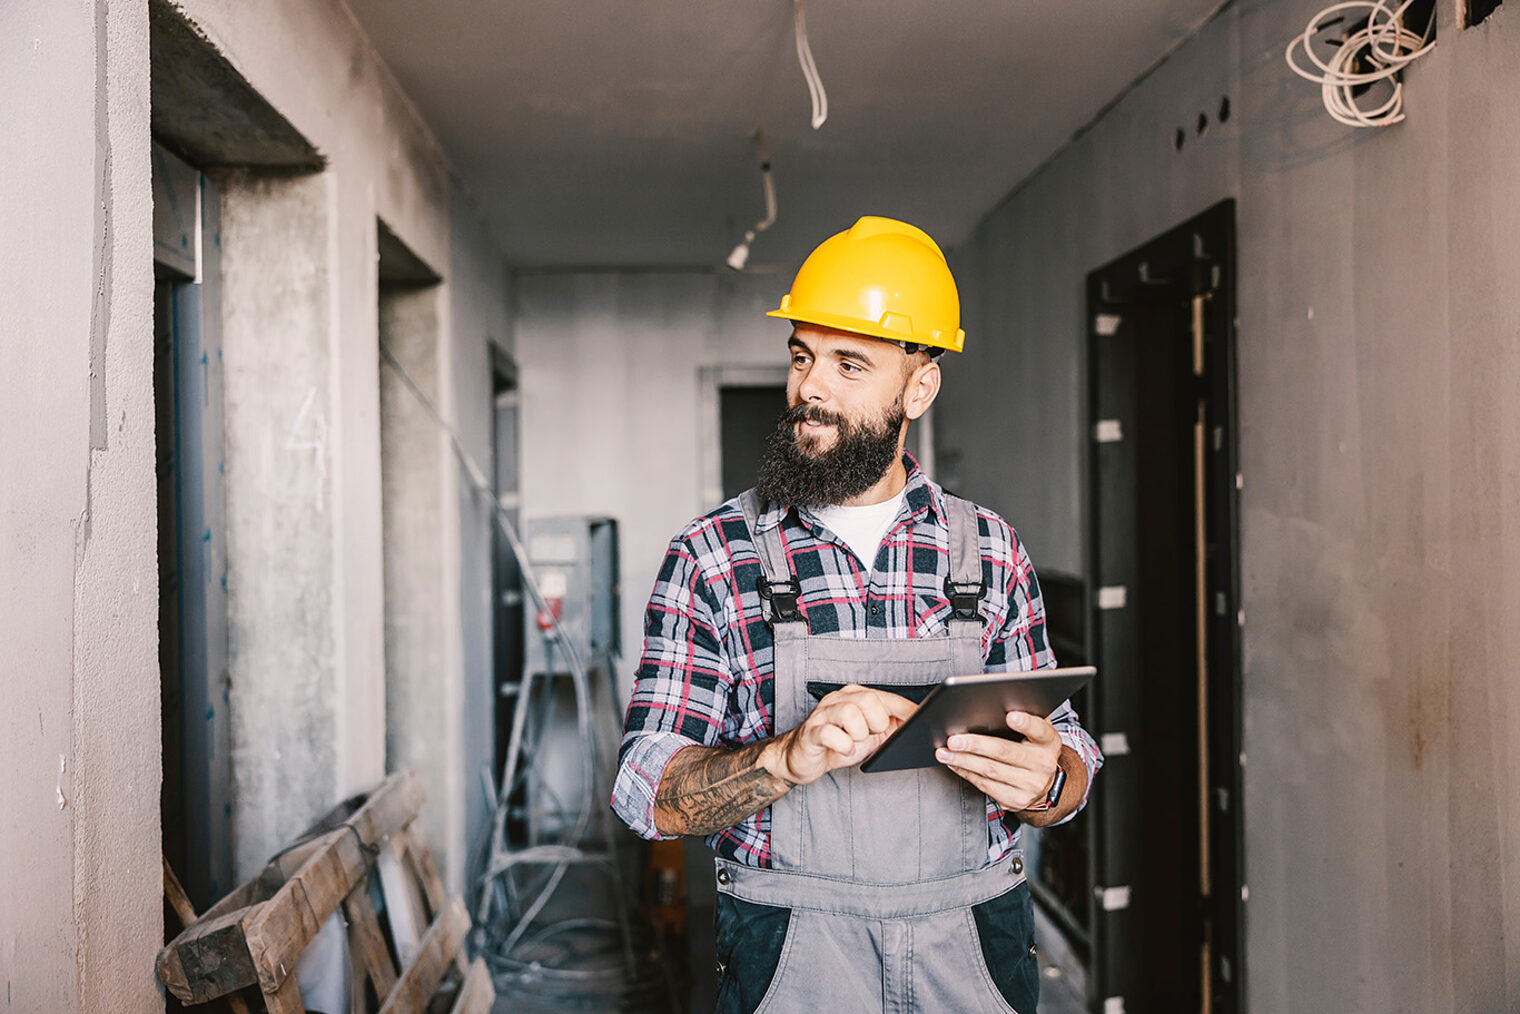 A dedicated worker using tablet for work in a building in a construction process. Schlagwort(e): worker, man, male, guy, people, person, portrait, beard, tattoo, blue collar, repairman, handyman, construction, foreman, job, work, fix, repair, helmet, renovation, site, building, engineer, safety, computer, tablet, construction worker, industrial, construction site, hardhat, coworker, alone, electronic, estate, check, examining, pad, internet